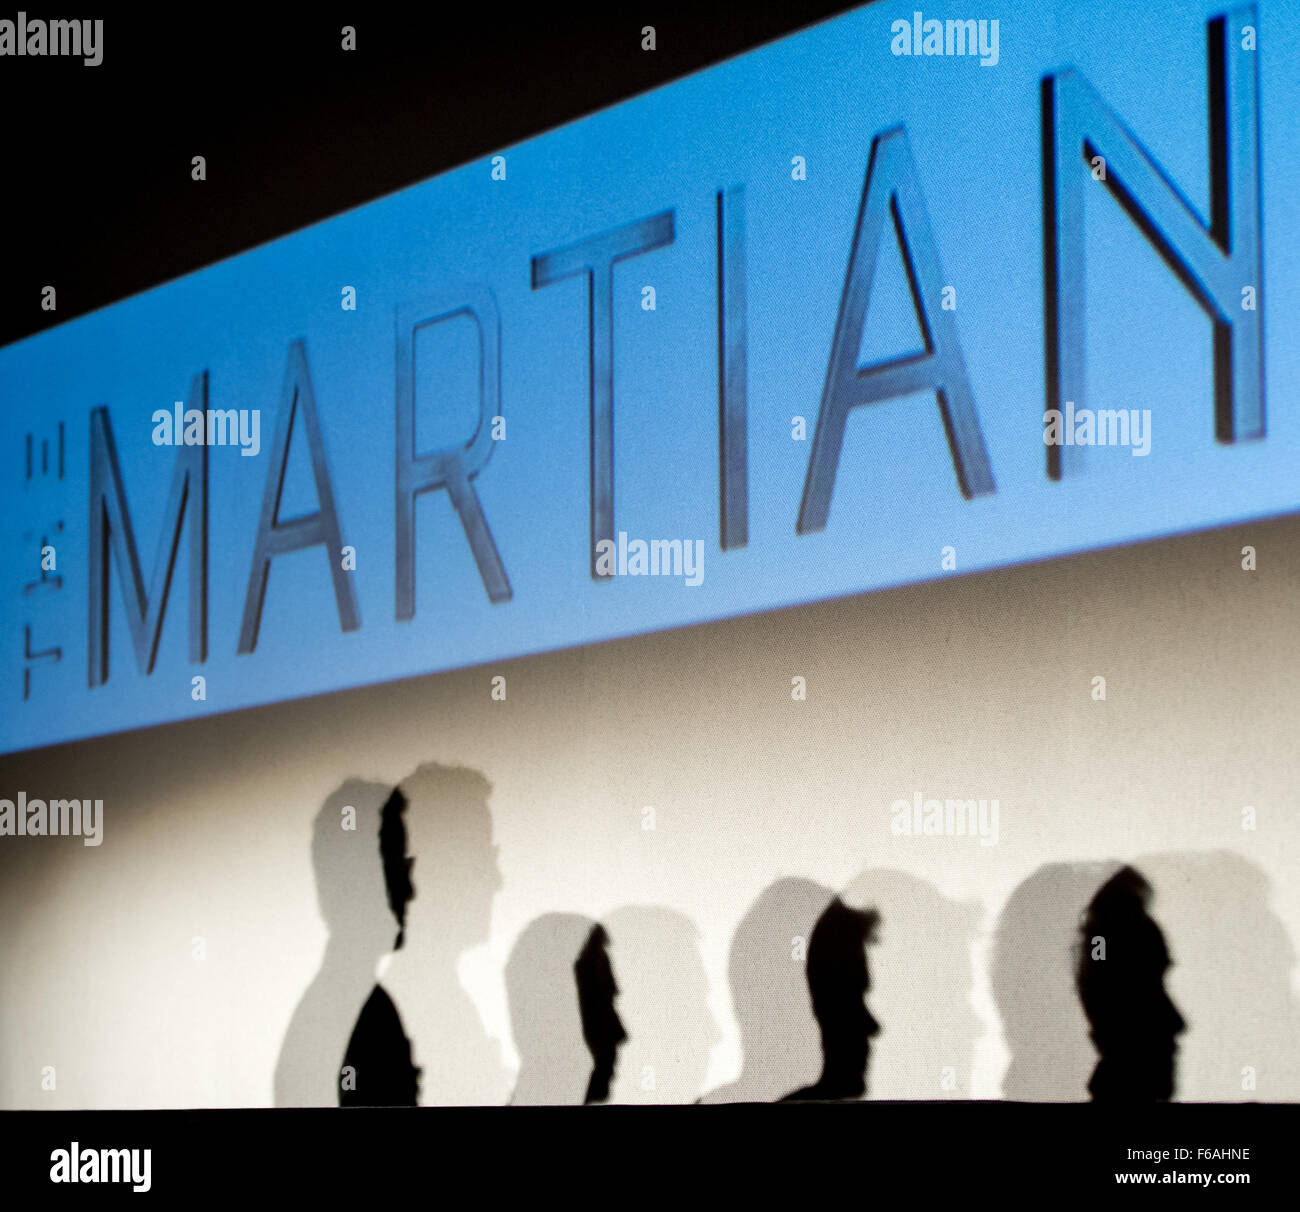 The silhouettes of Moderator Angela Watercutter of WIRED magazine, left, NASA Astronaut Drew Feustel, Actor Matt Damon, and Director Ridley Scott are seen as they participate in a question and answer session about NASA’s journey to Mars and the film ”The Martian,'  Tuesday, Aug. 18, 2015, at the United Artist Theater in La Cañada Flintridge, California. NASA scientists and engineers served as technical consultants on the film. The movie portrays a realistic view of the climate and topography of Mars, based on NASA data, and some of the challenges NASA faces as we prepare for human exploration  Stock Photo